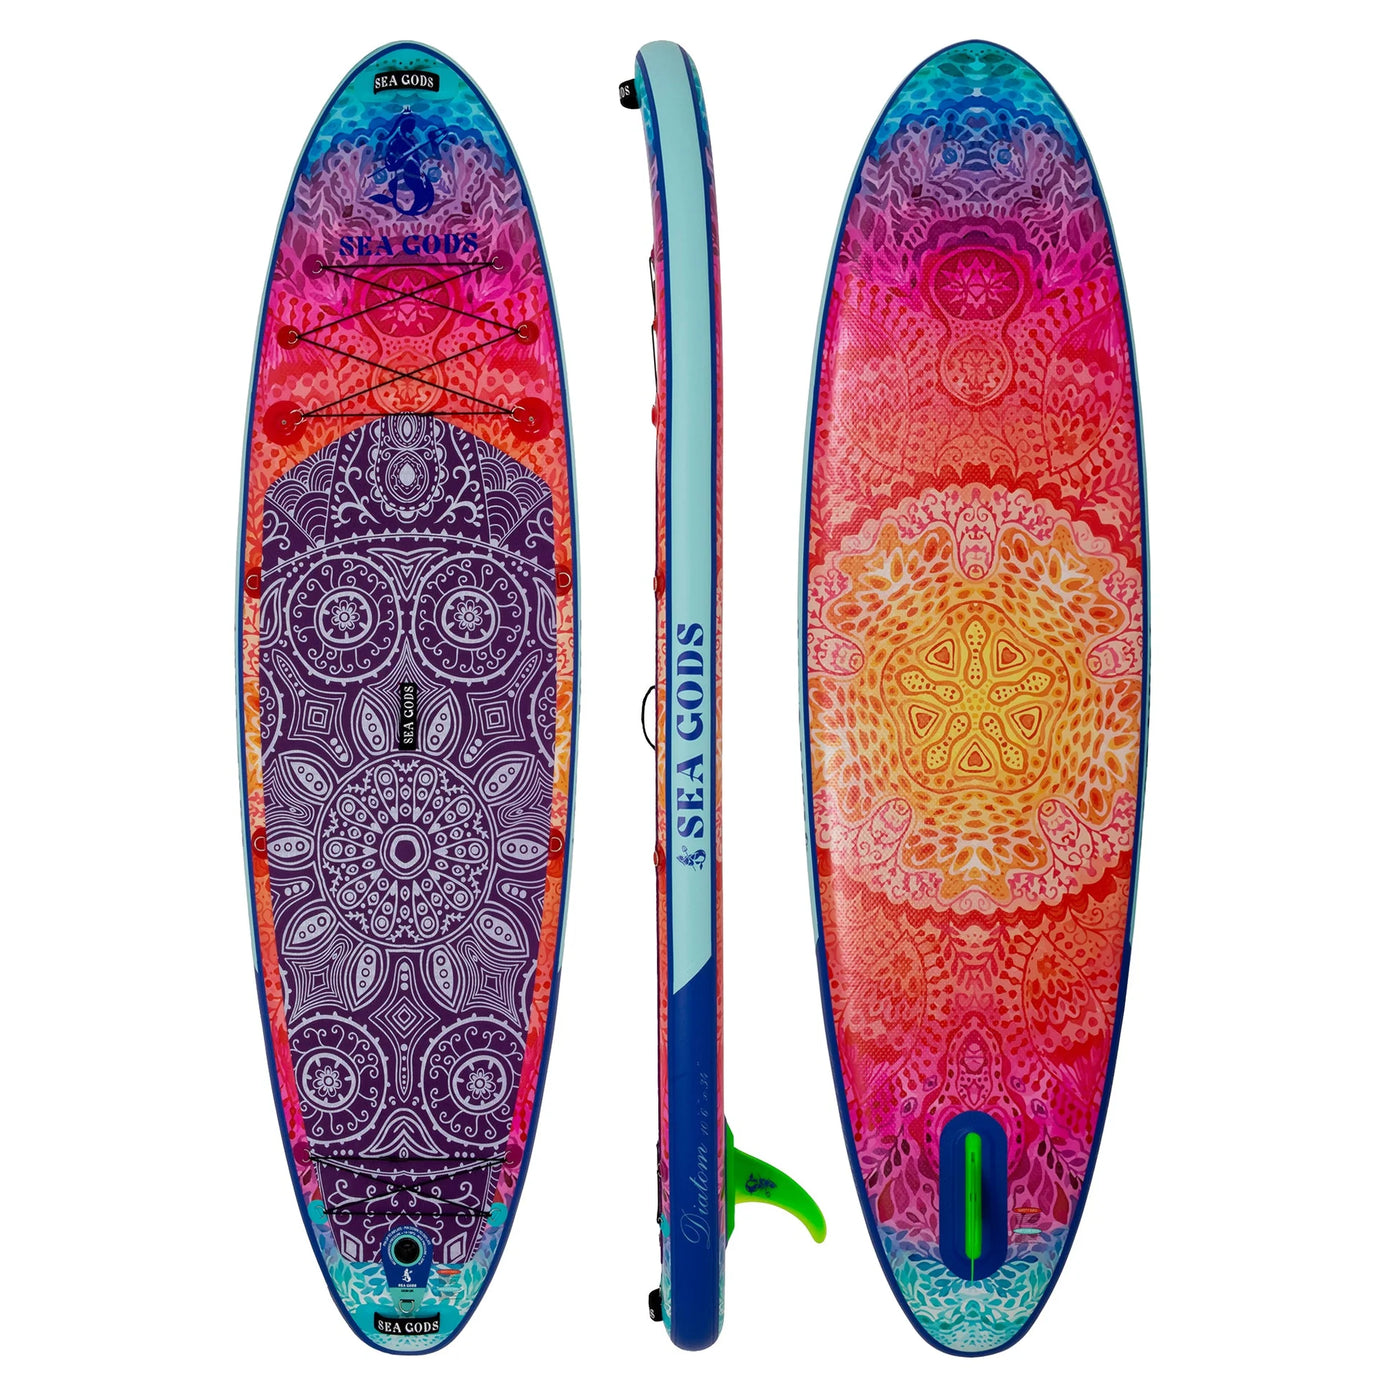 Diatom 10'6" - Inflatable Stand Up Paddleboard Package